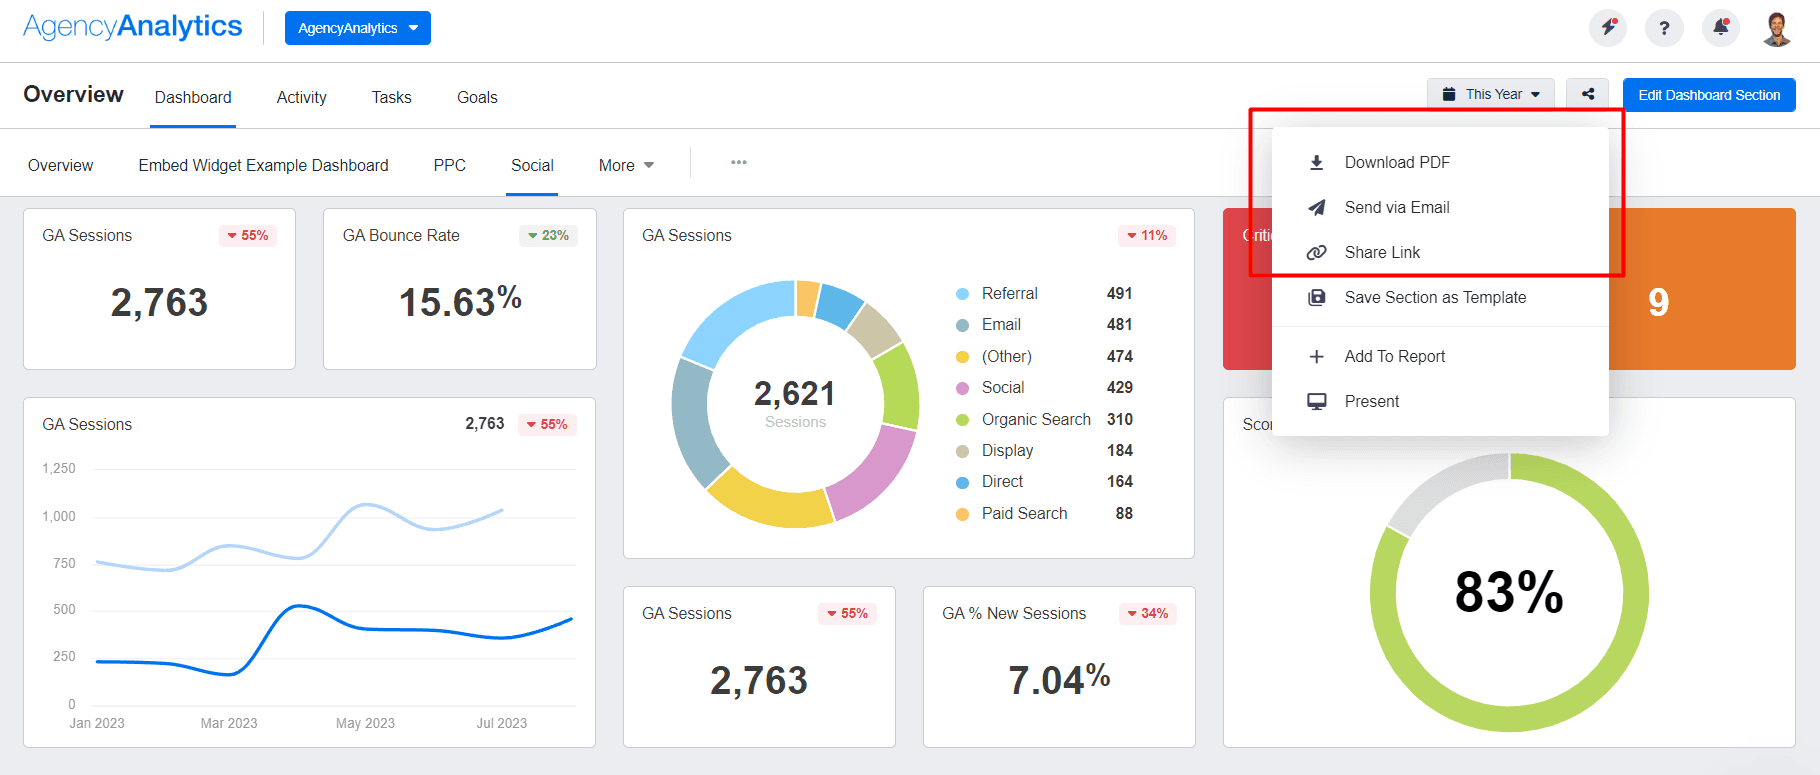 AgencyAnalytics Reporting Features